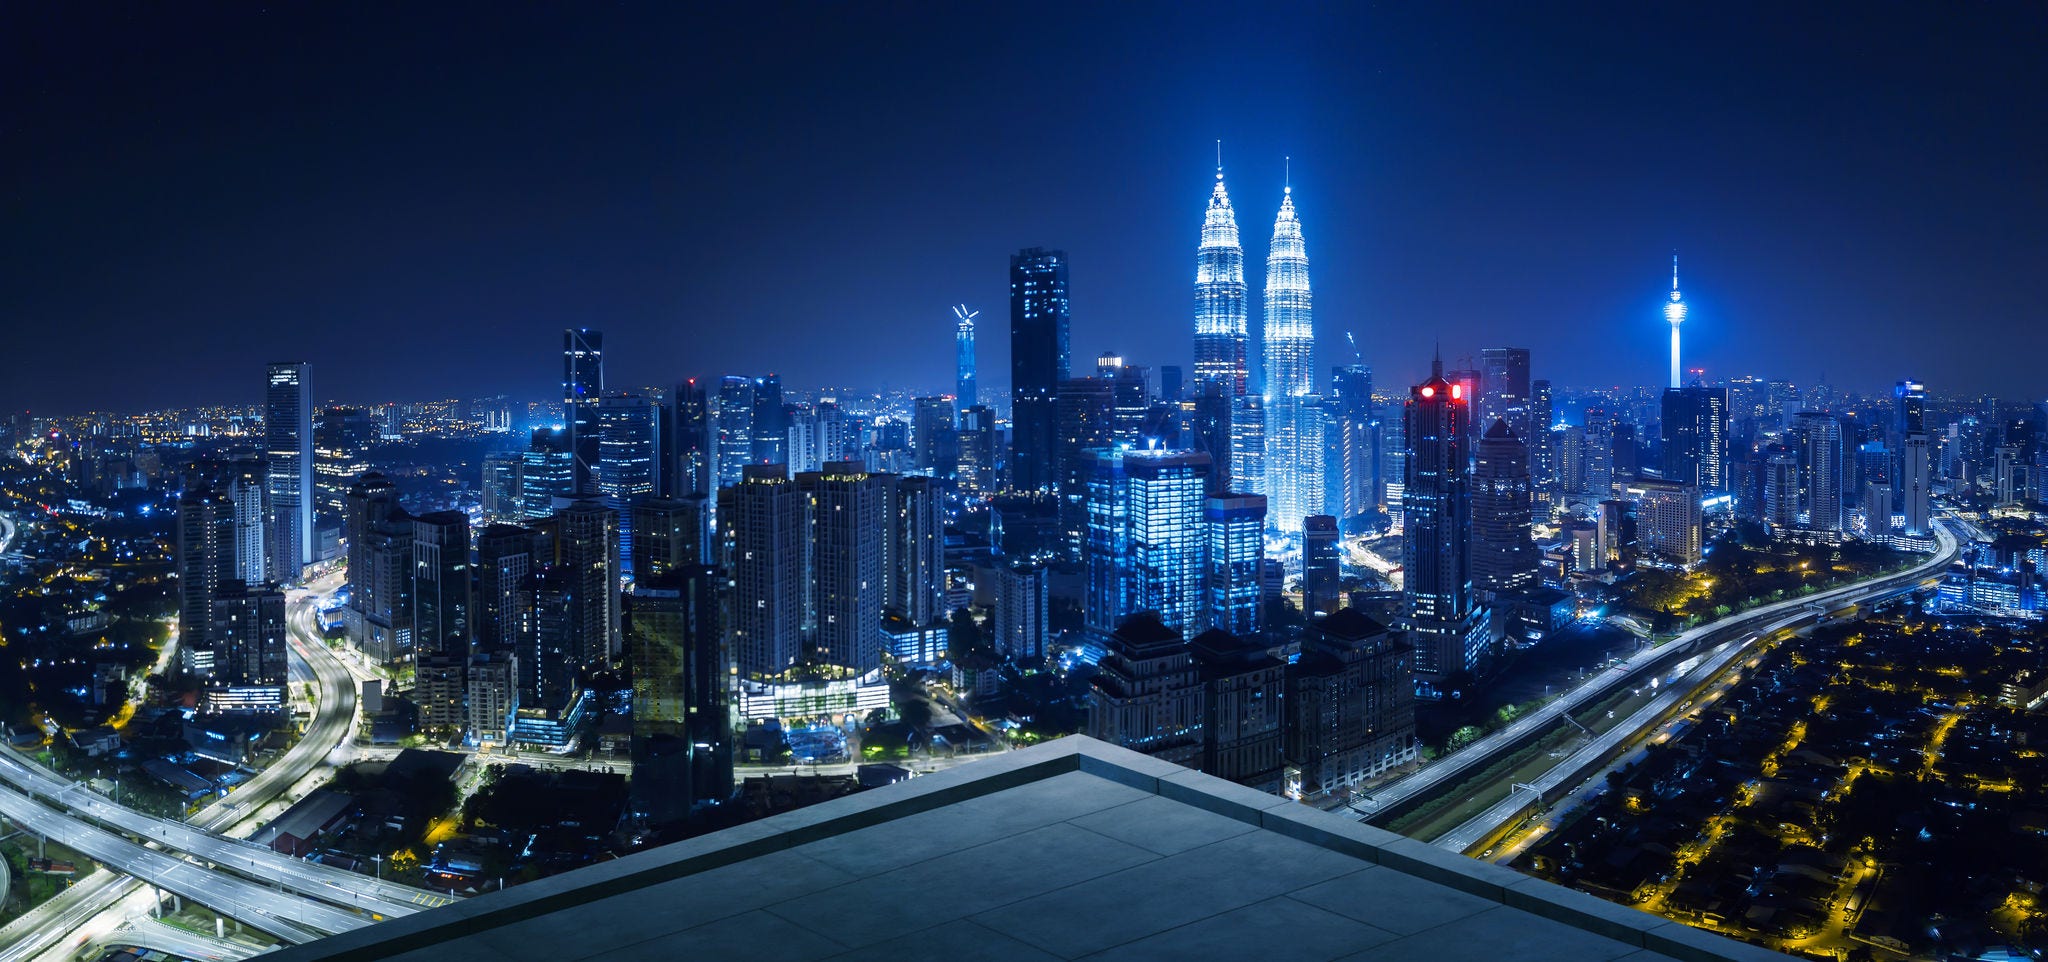 View from rooftop balcony of Kuala Lumpur cityscape skyline at night